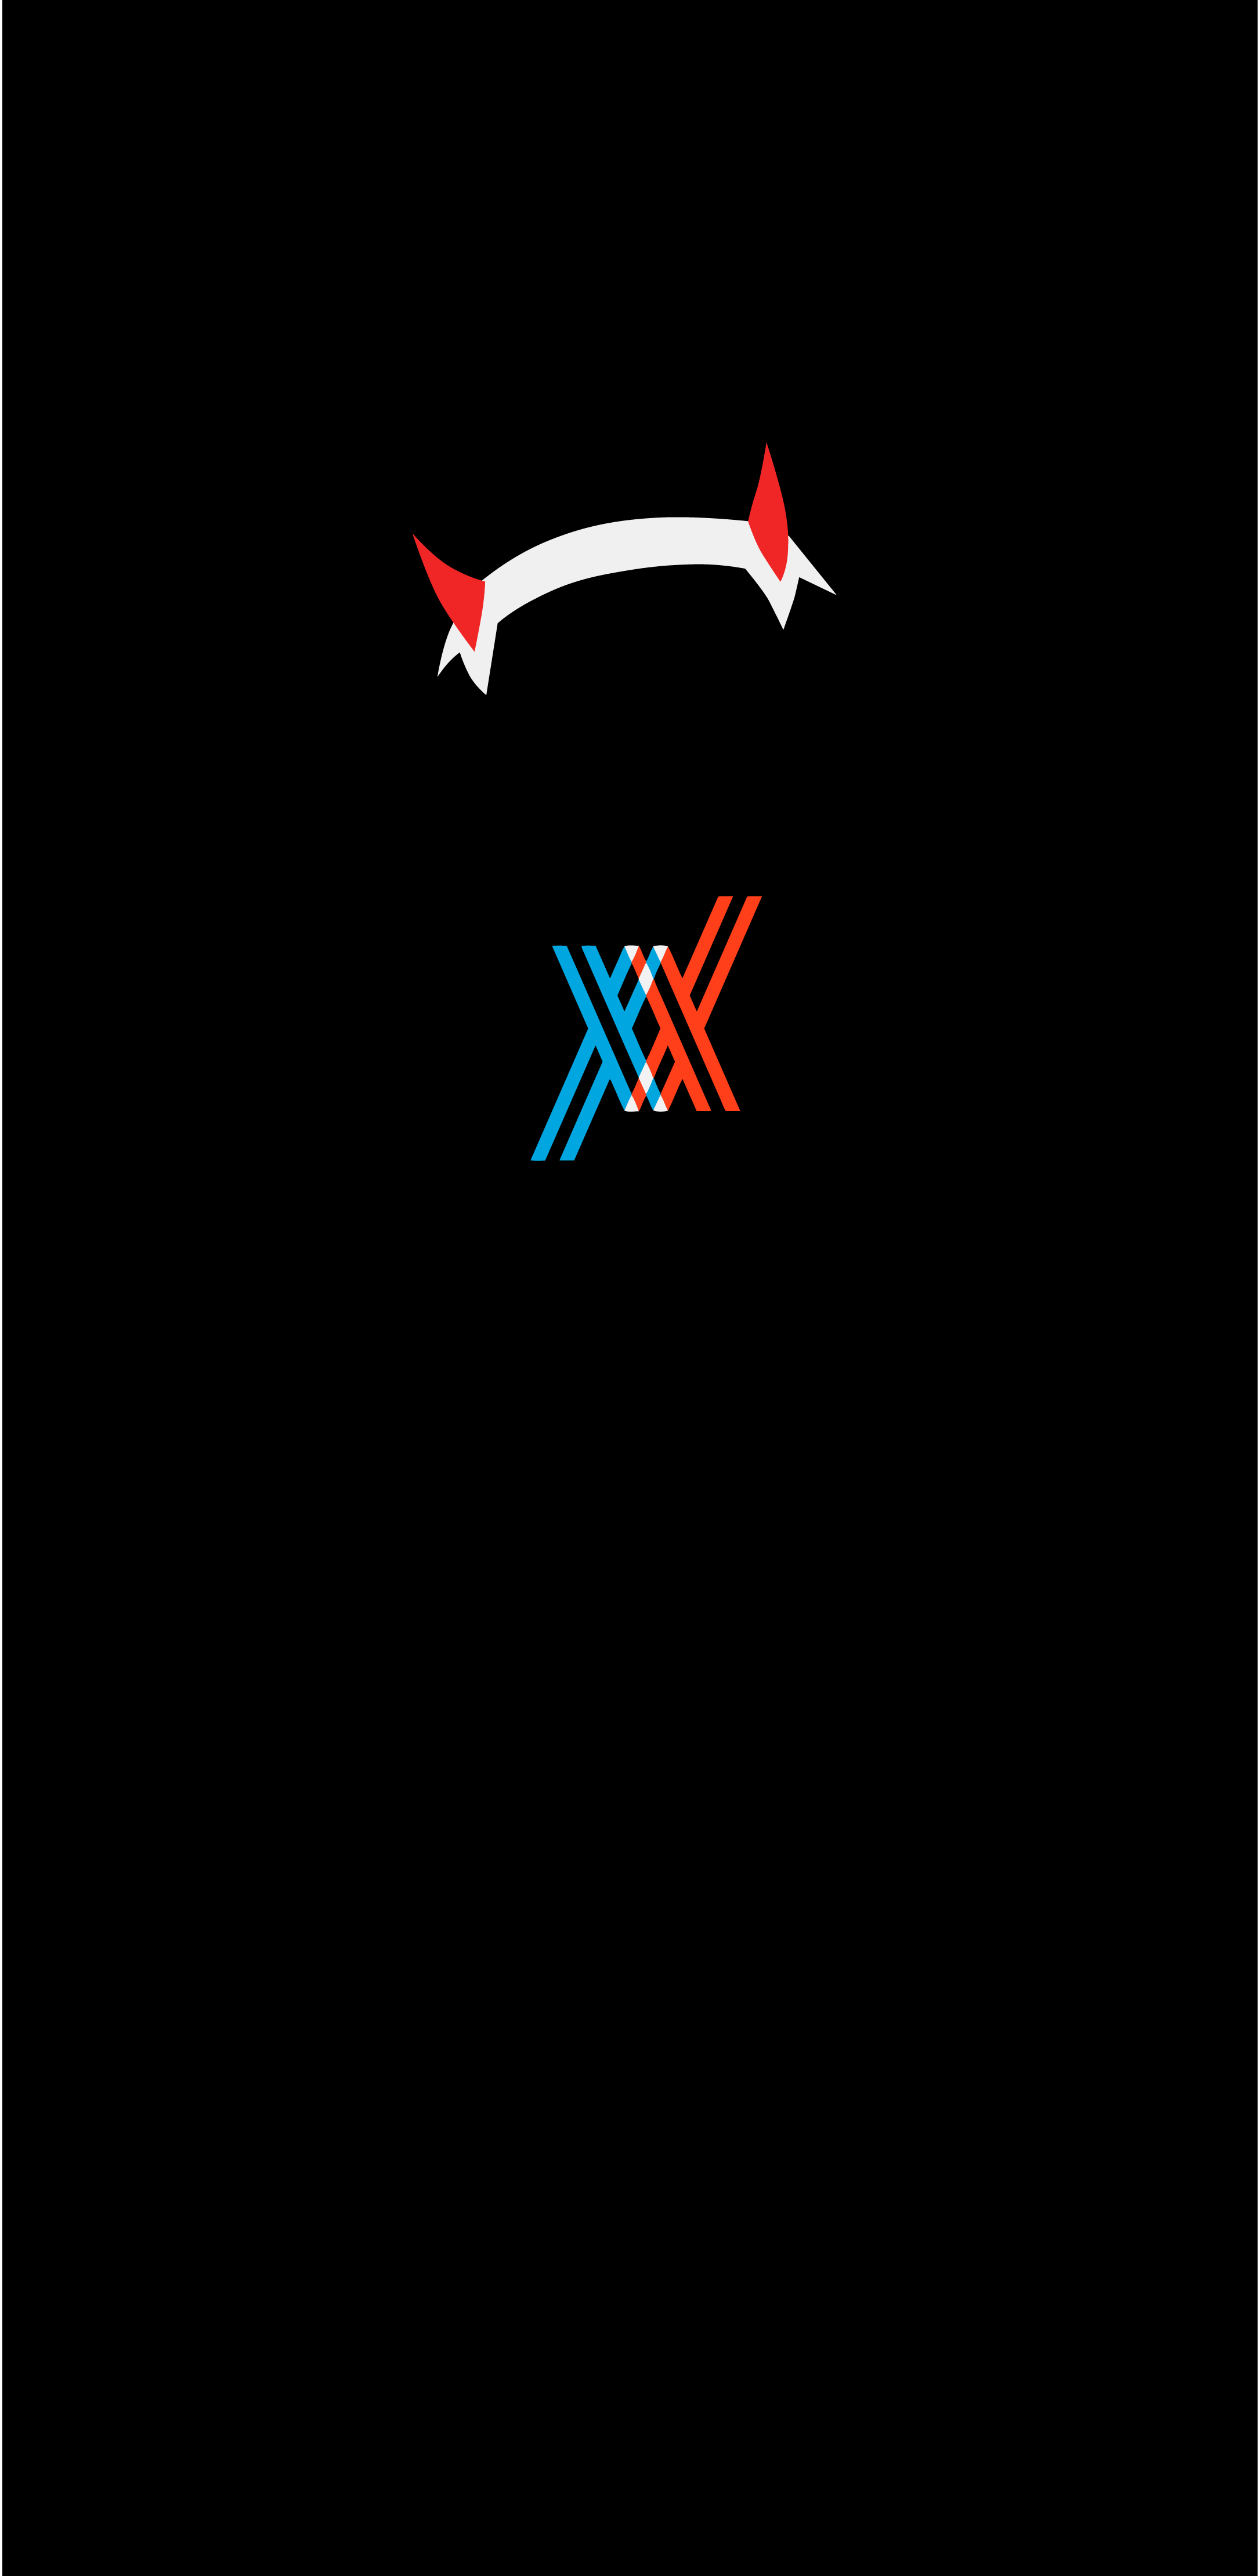 Made this minimalist AMOLED wallpaper, thought you guys